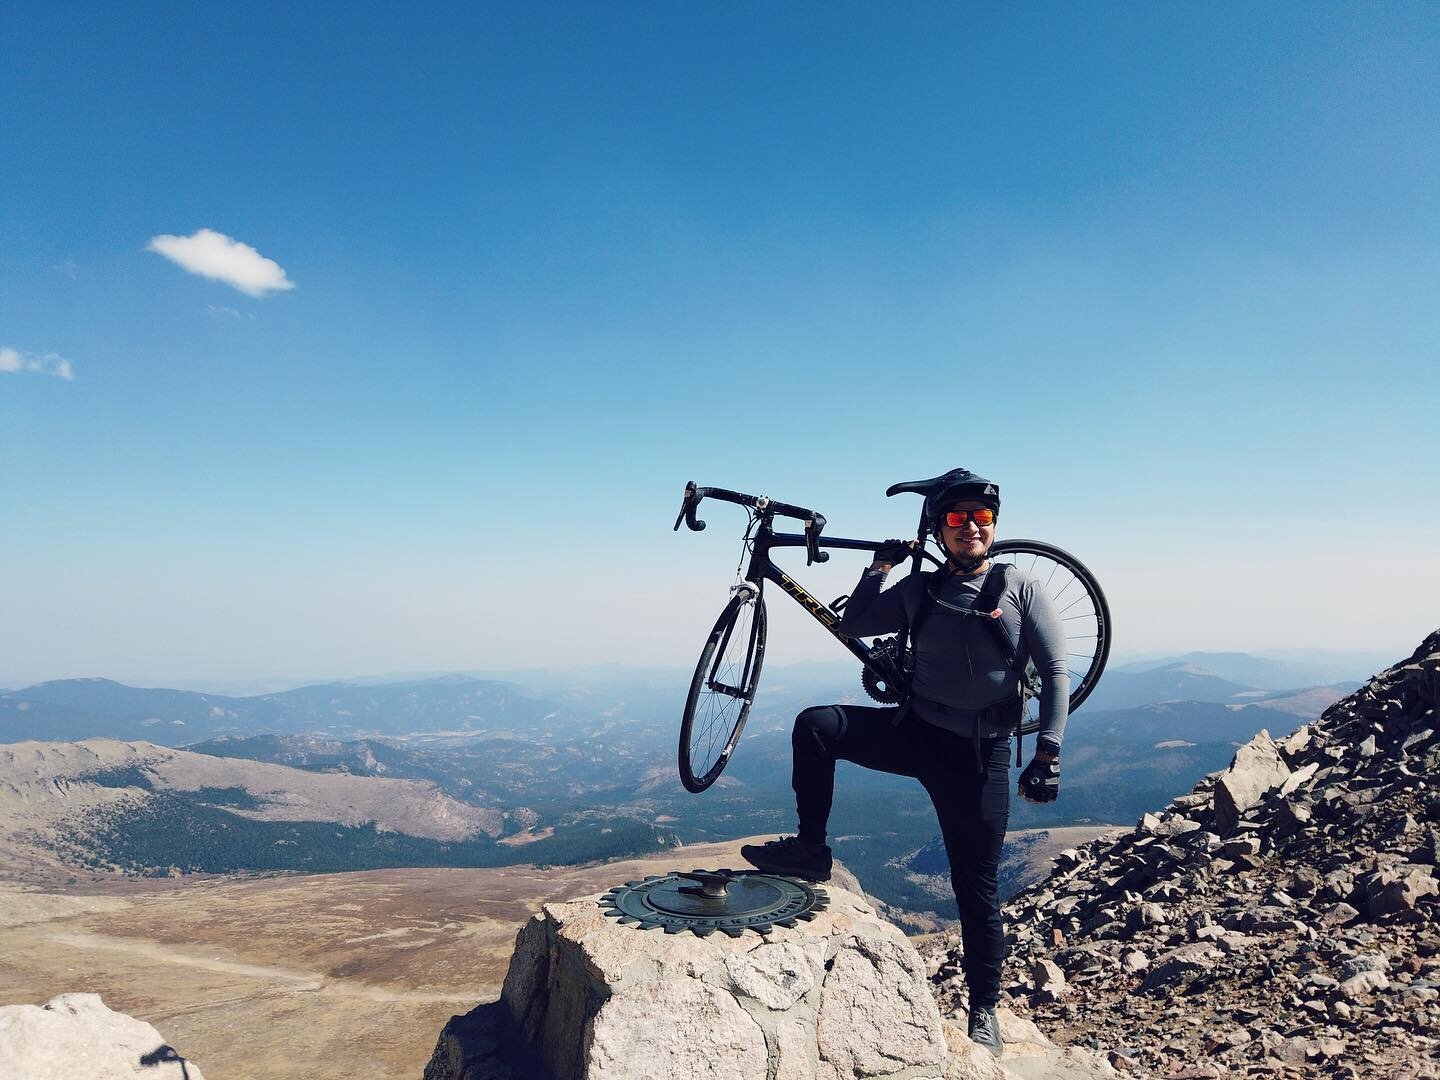 Biked up Mt Evans - 14,265ft.  Knocking that bucket list out with my paps and best bud since Kindergarten, @5280matt.  Check out that baby billy goat 🐐 🤩

#mtevans #roadbike #14er #billygoat #bucketlist #Colorado #rockymountainhigh #babygoats